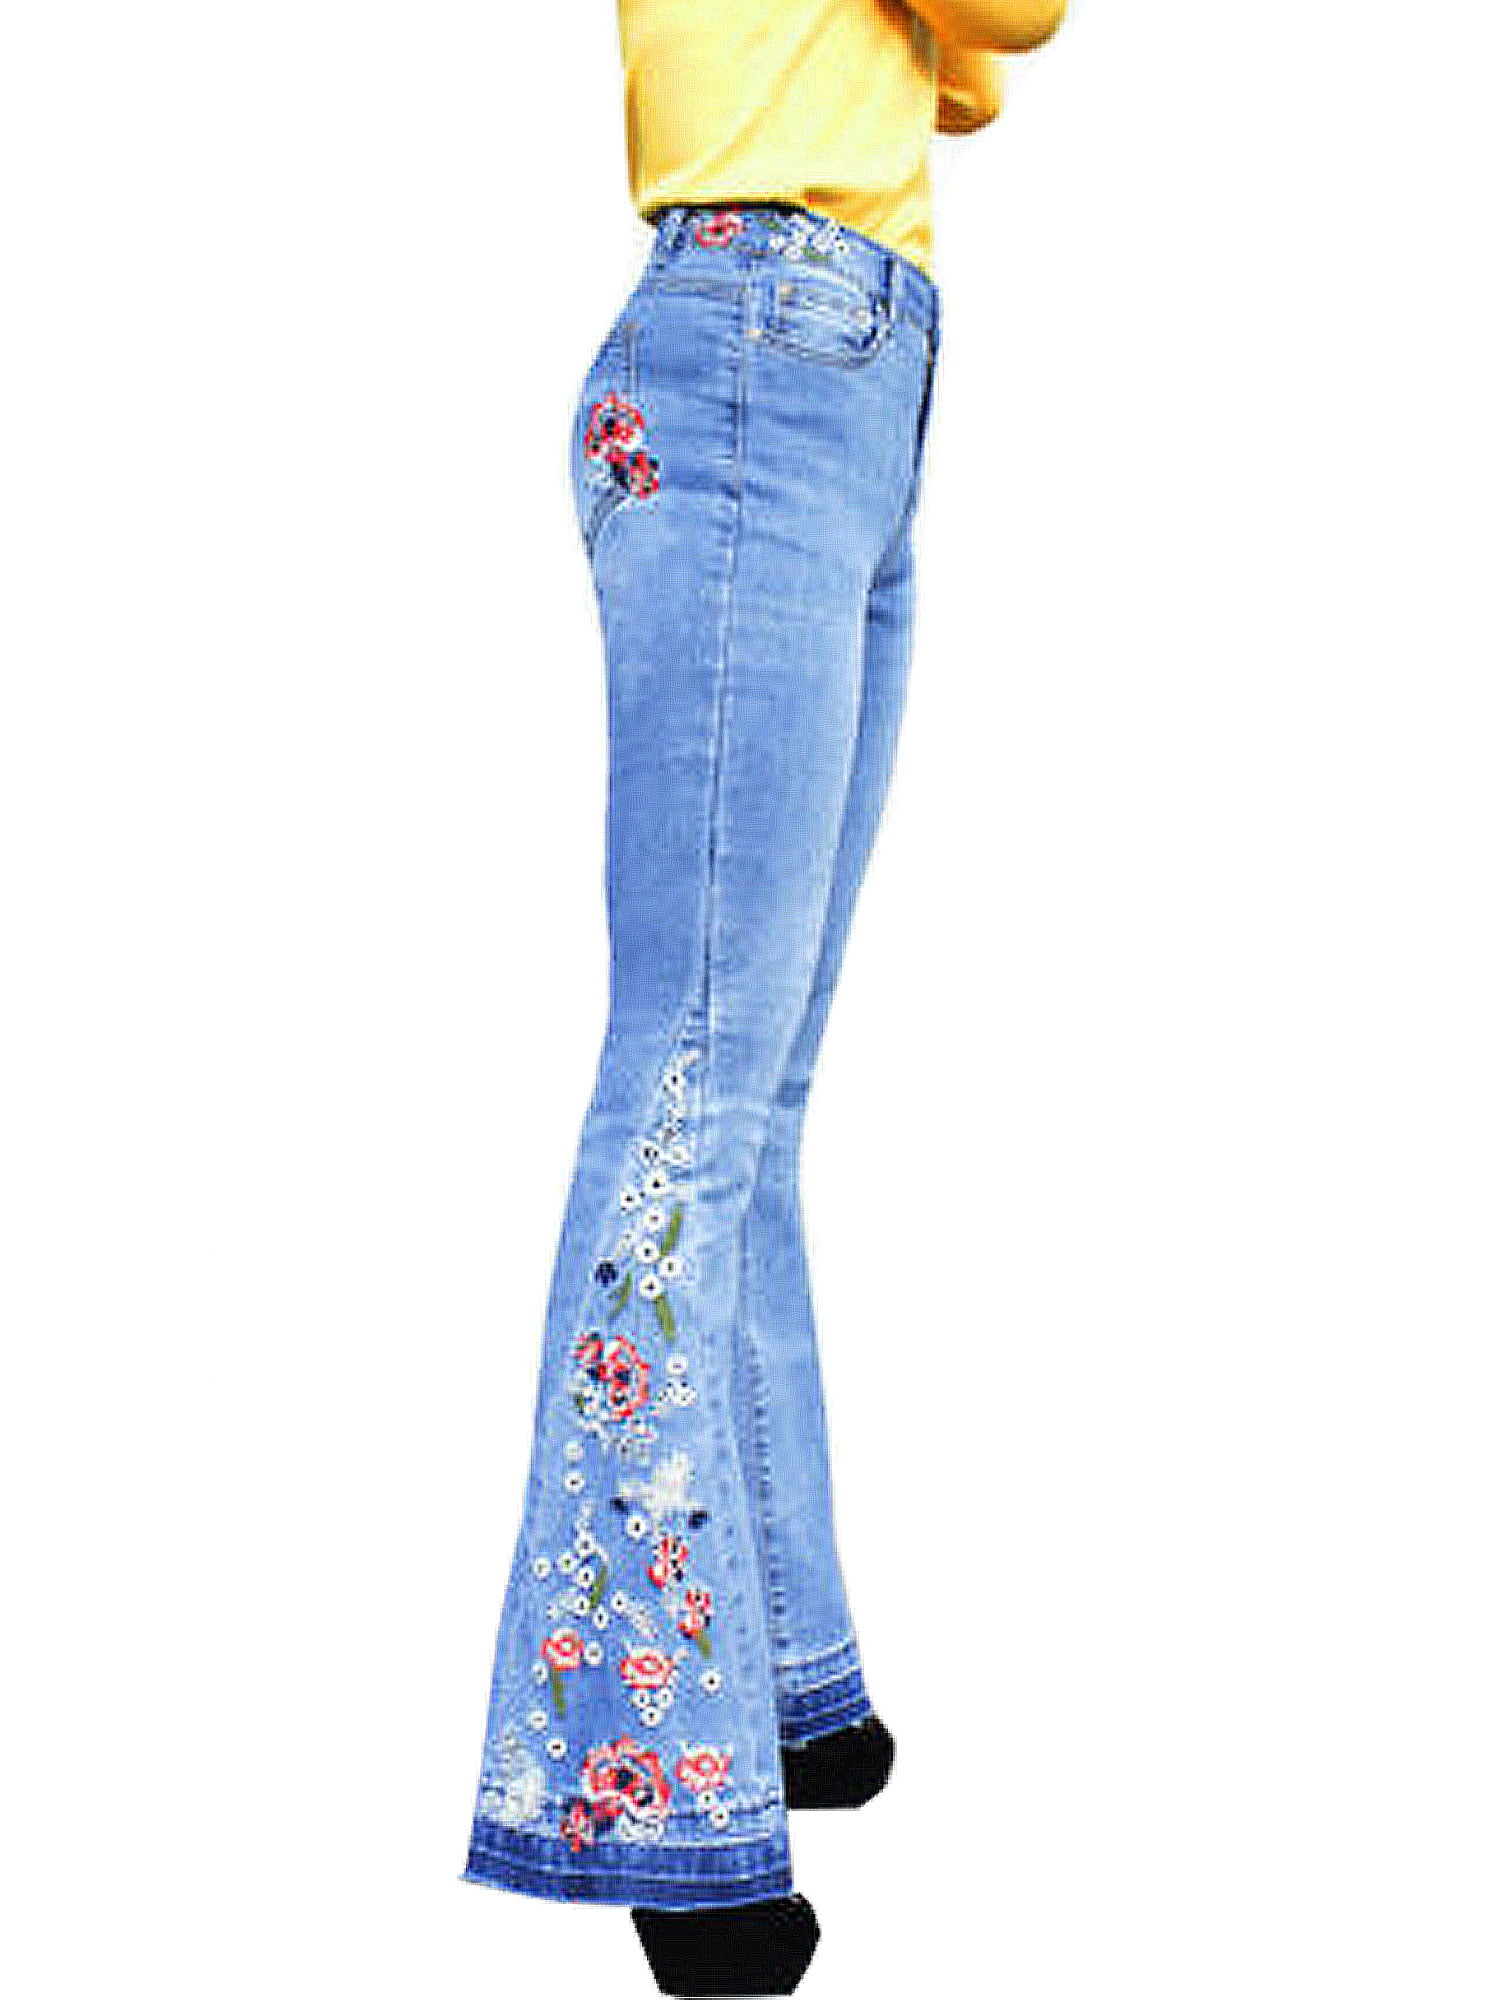 womens high waisted flare jeans